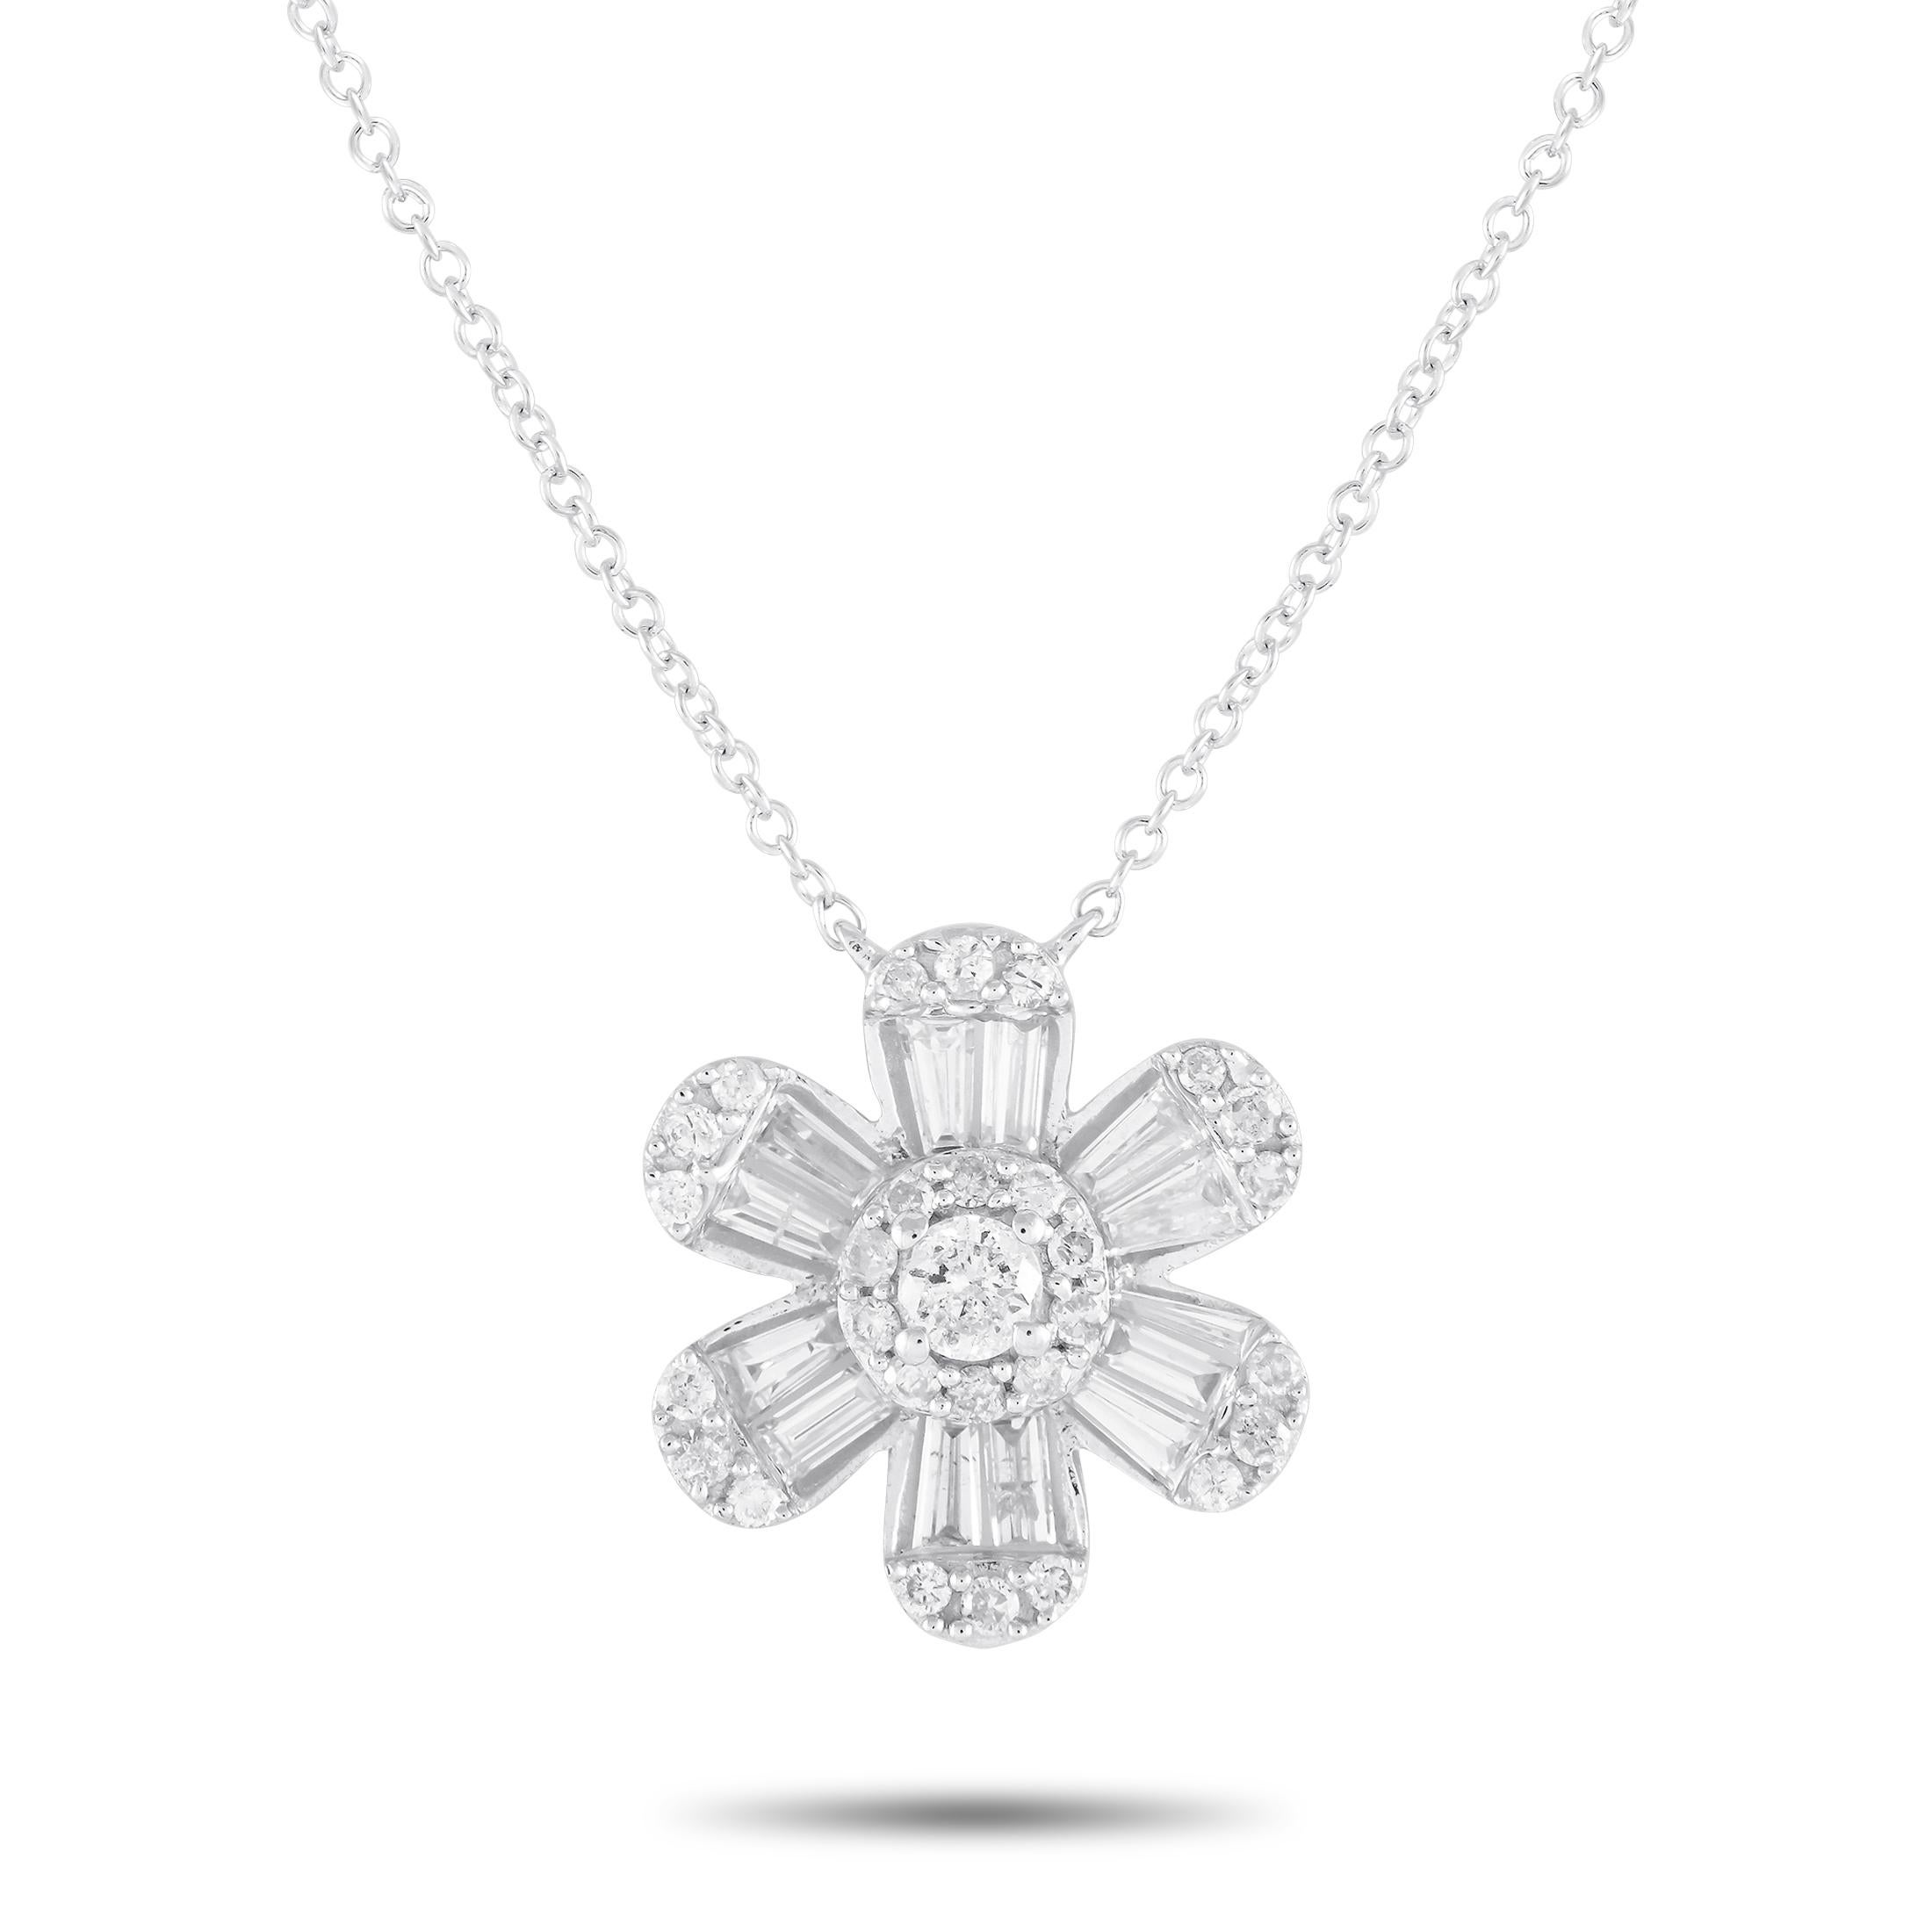 14K White Gold 0.65ct Diamond Flower Necklace NK01355 In New Condition For Sale In Southampton, PA